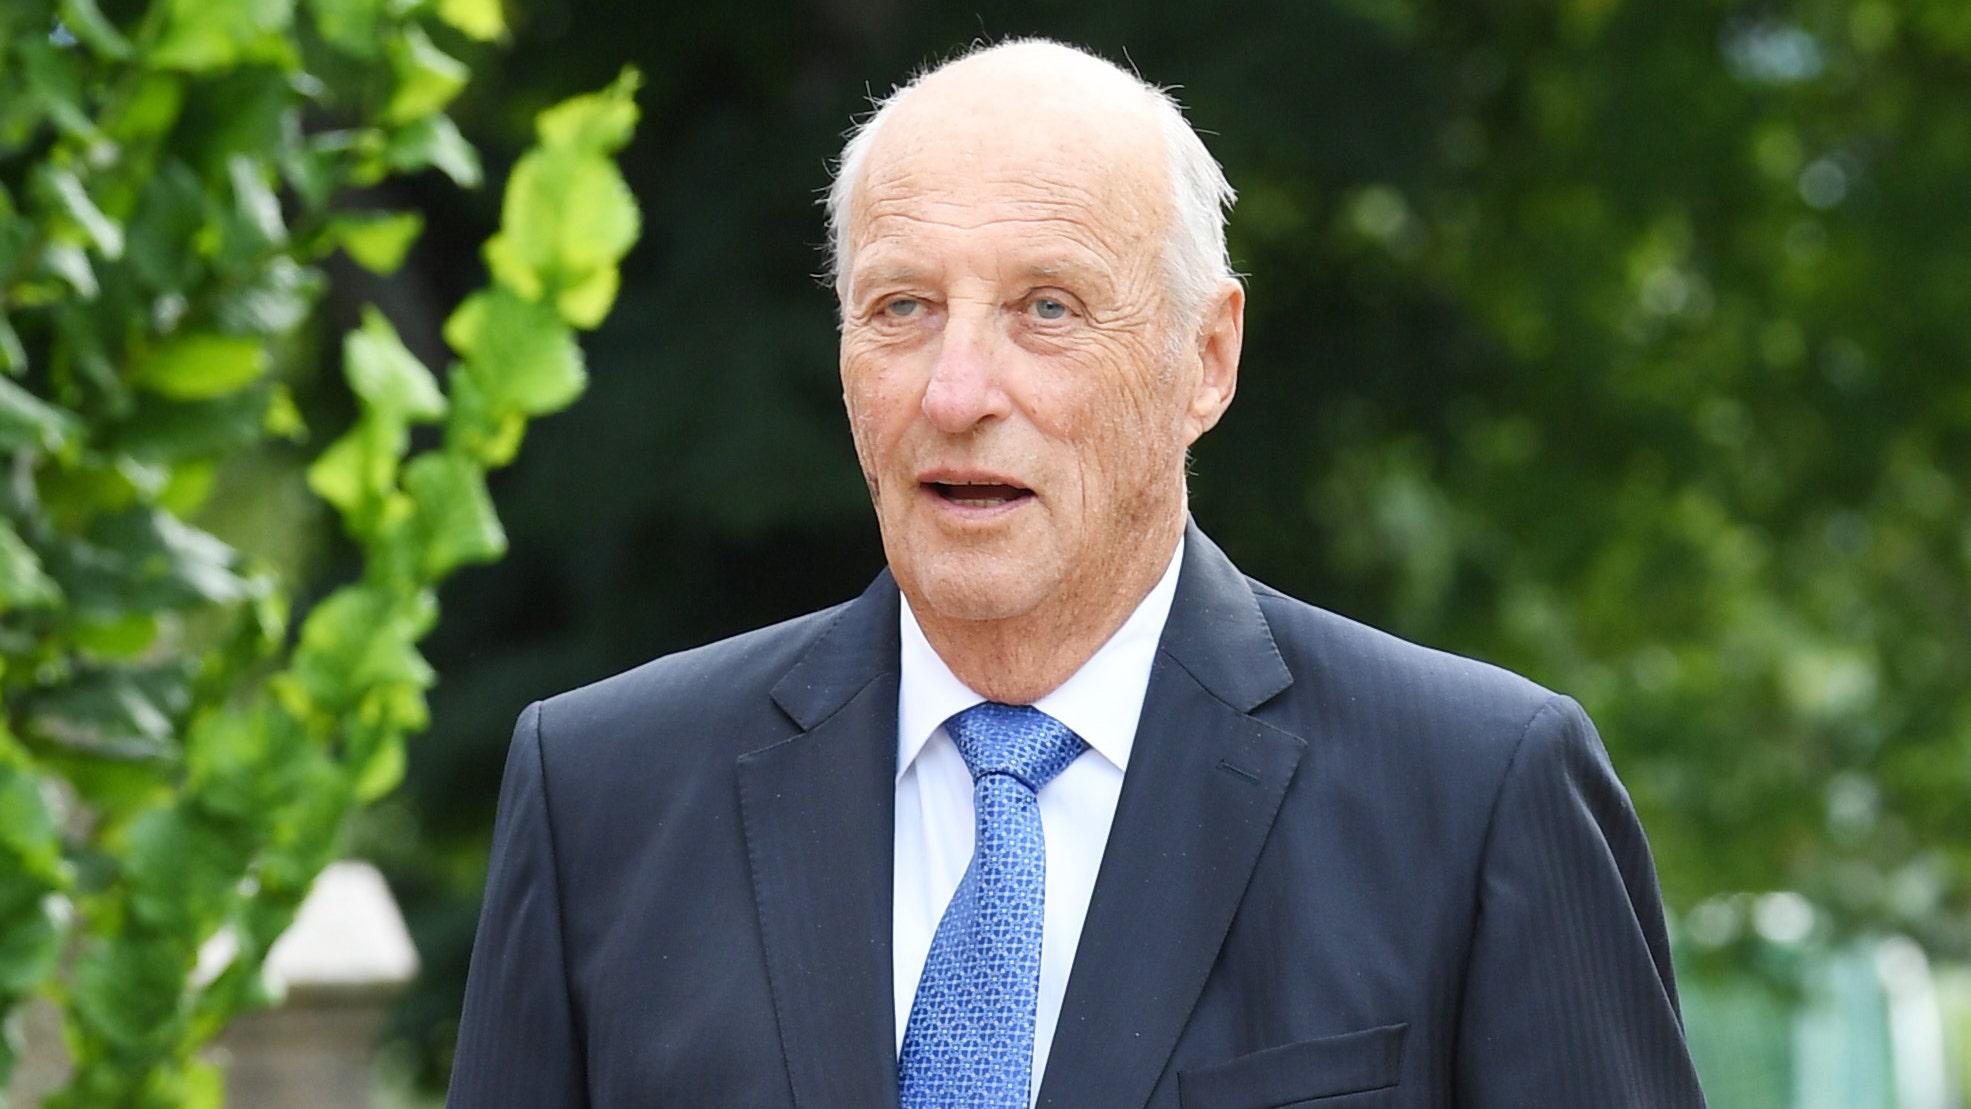 King Harald V of Norway given permanent pacemaker